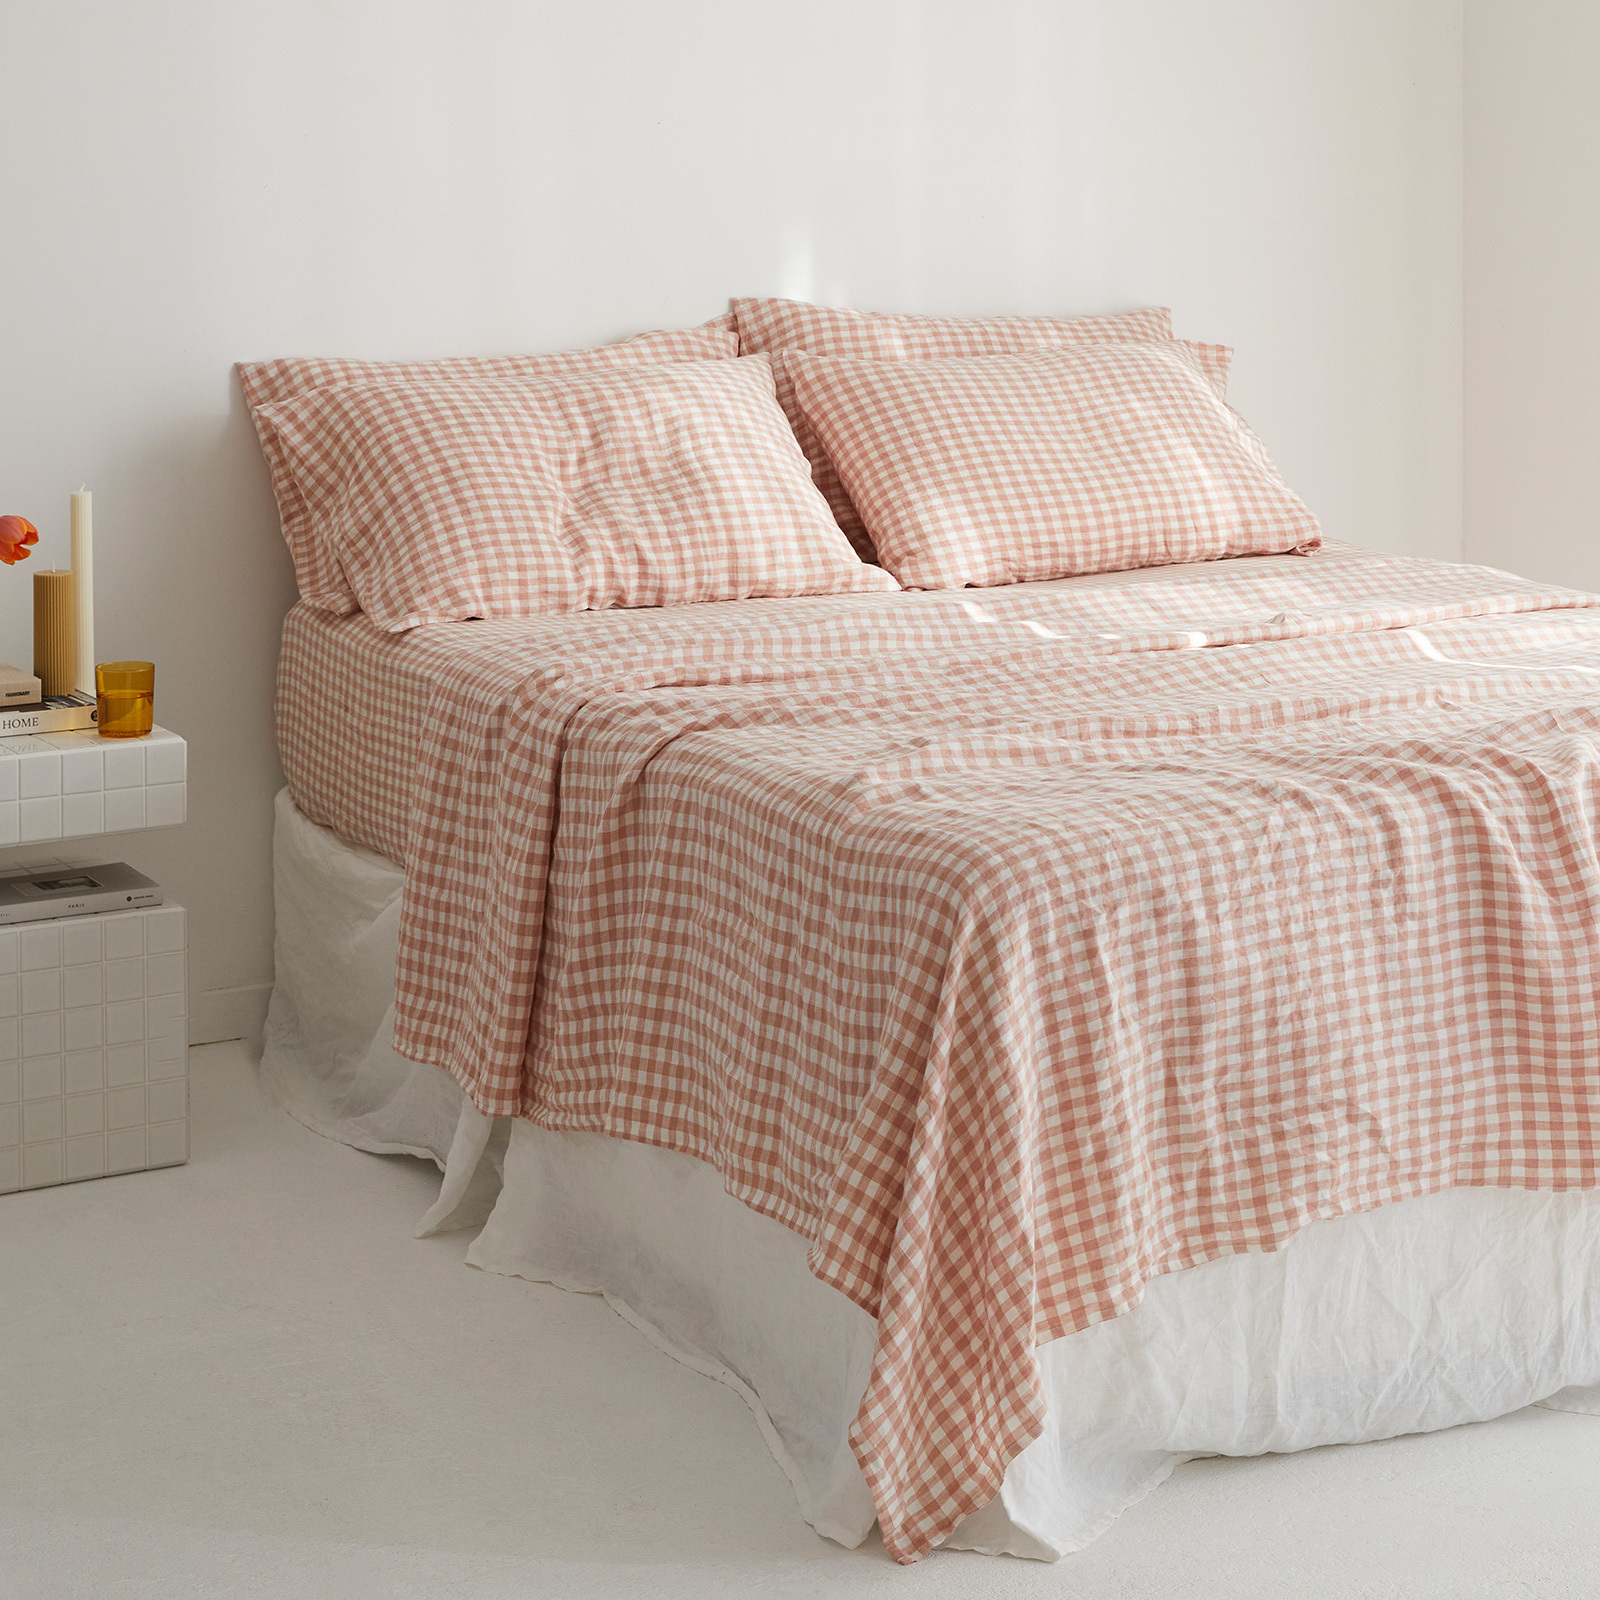 French linen Flat Sheet in CLAY Gingham